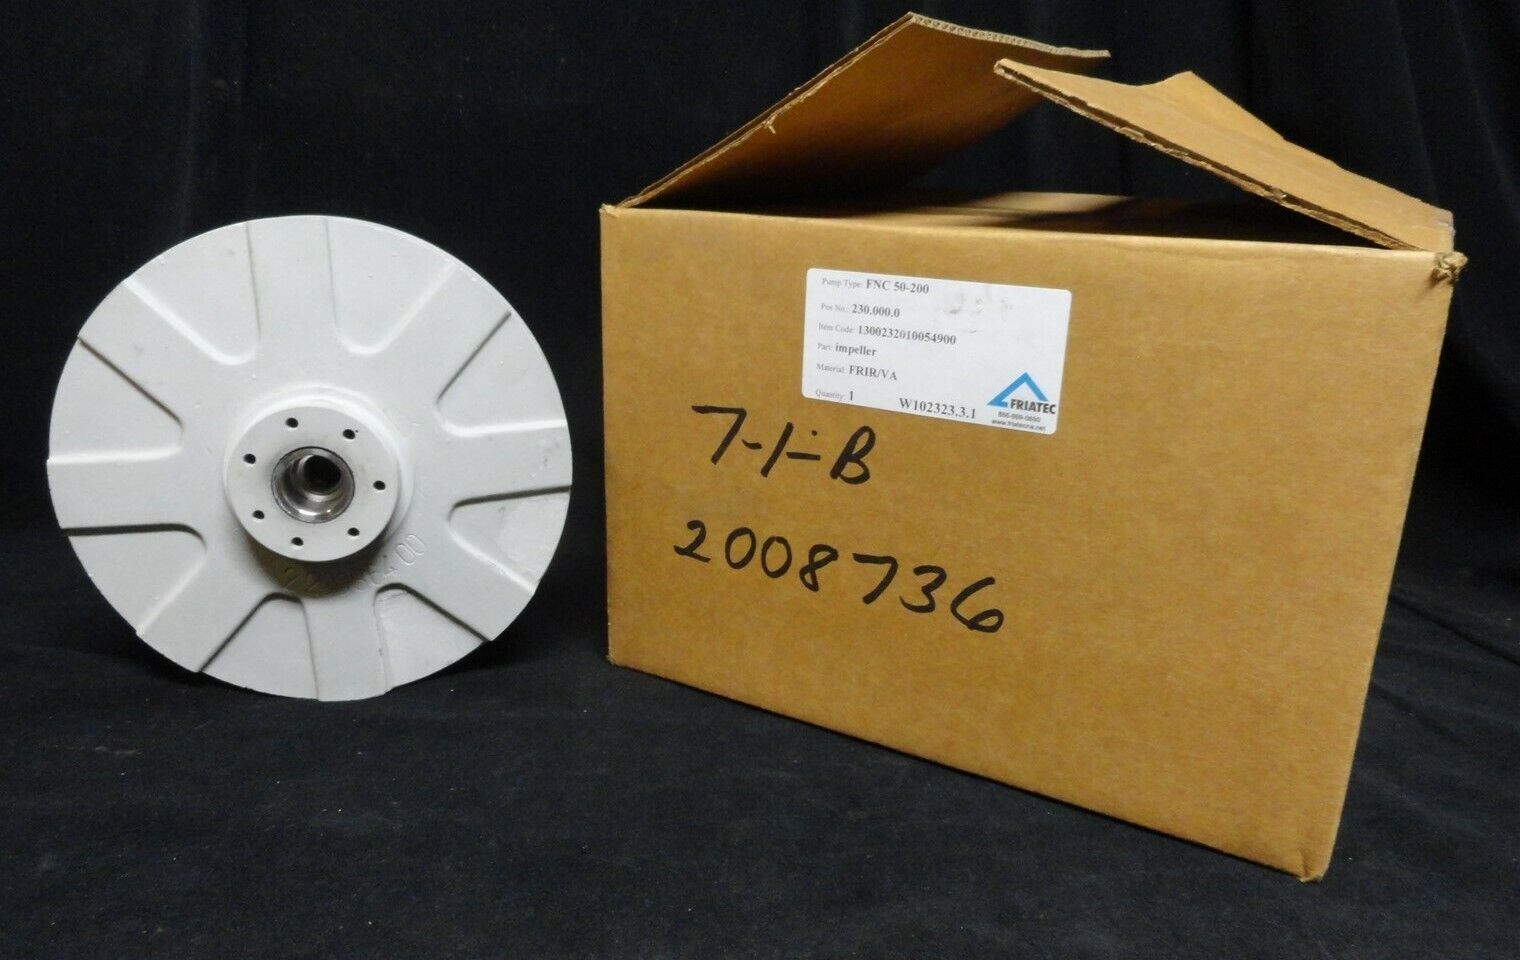 FRIATEC - PUMP TYPE: FNC 50-200 - CHEMICAL IMPELLER * W102323.3.1 NEW IN BOX